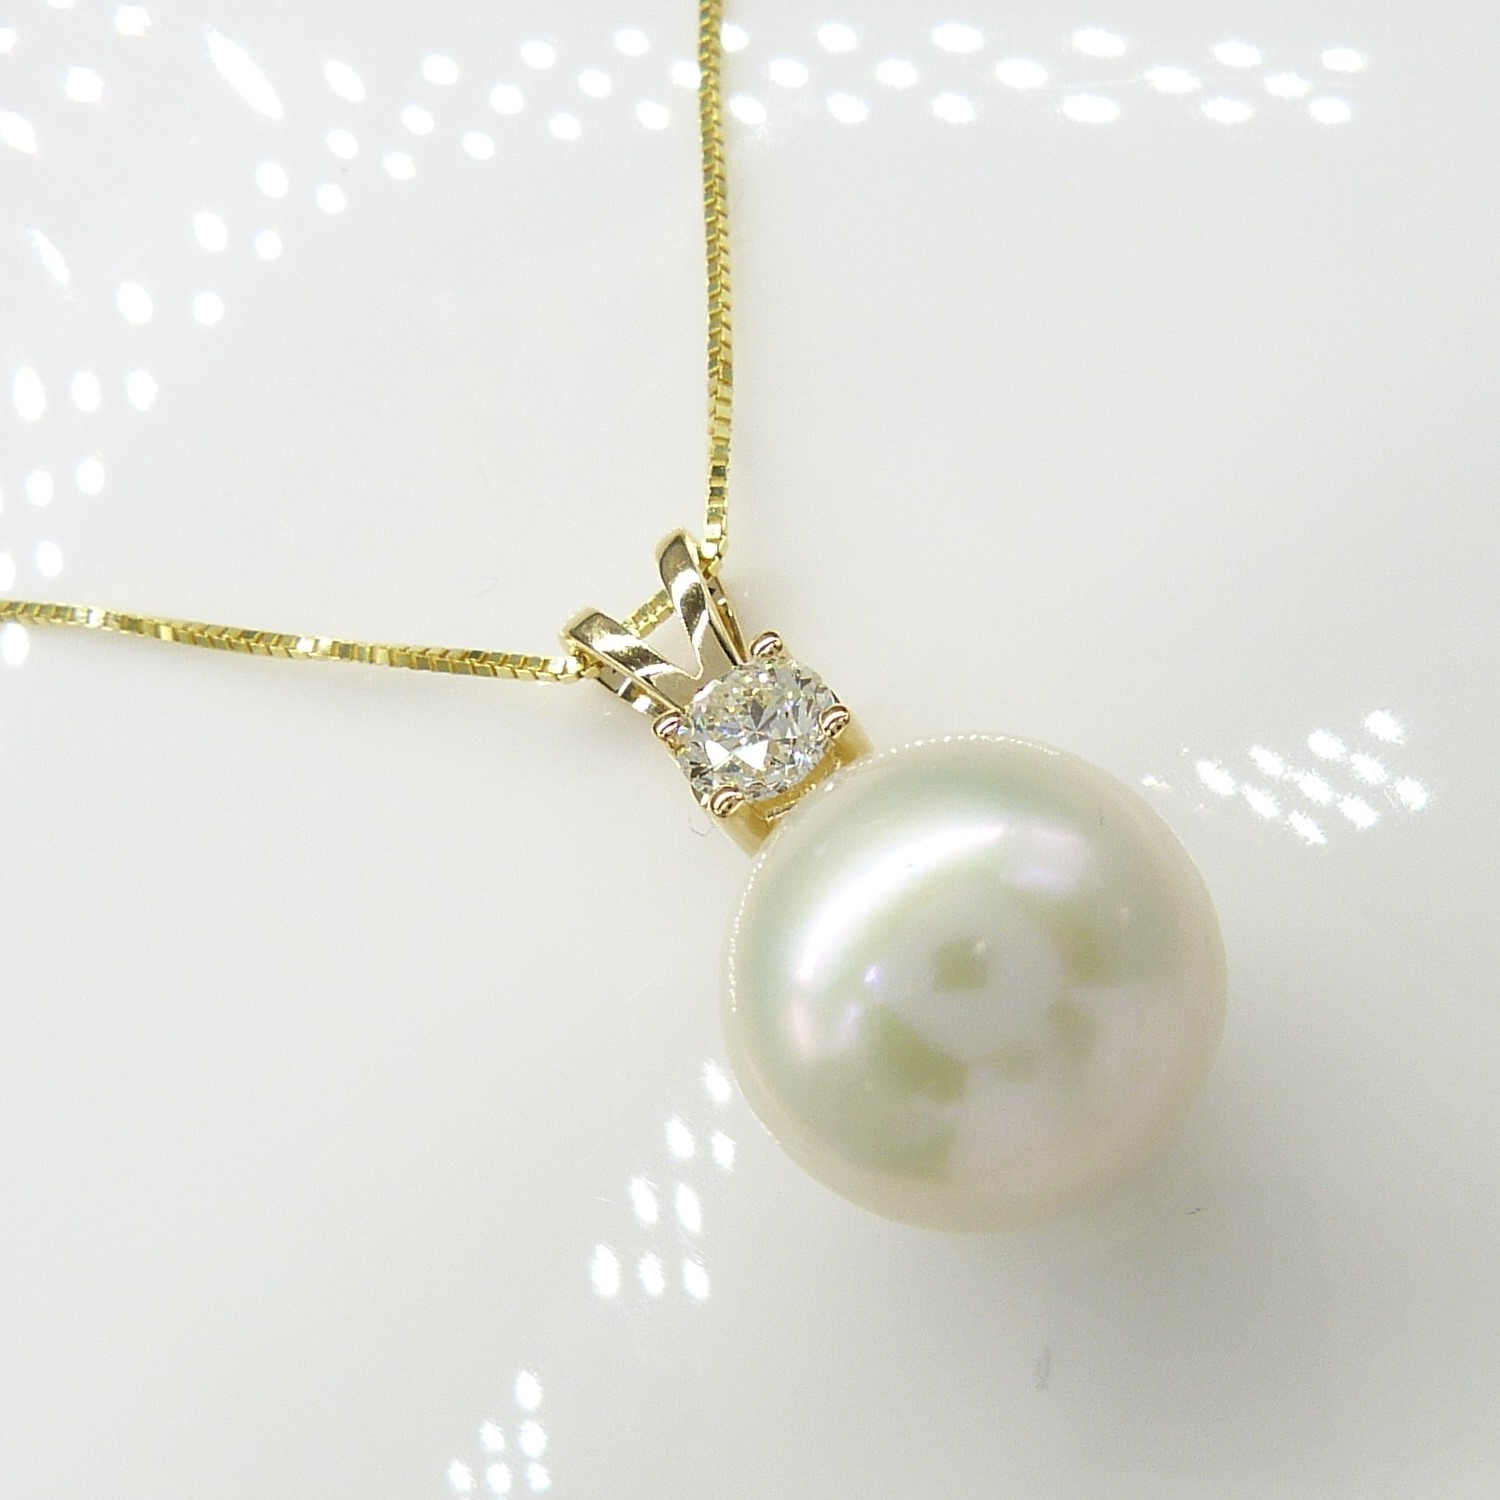 Yellow gold round freshwater pearl and 0.23 carat diamond necklace - Image 2 of 6